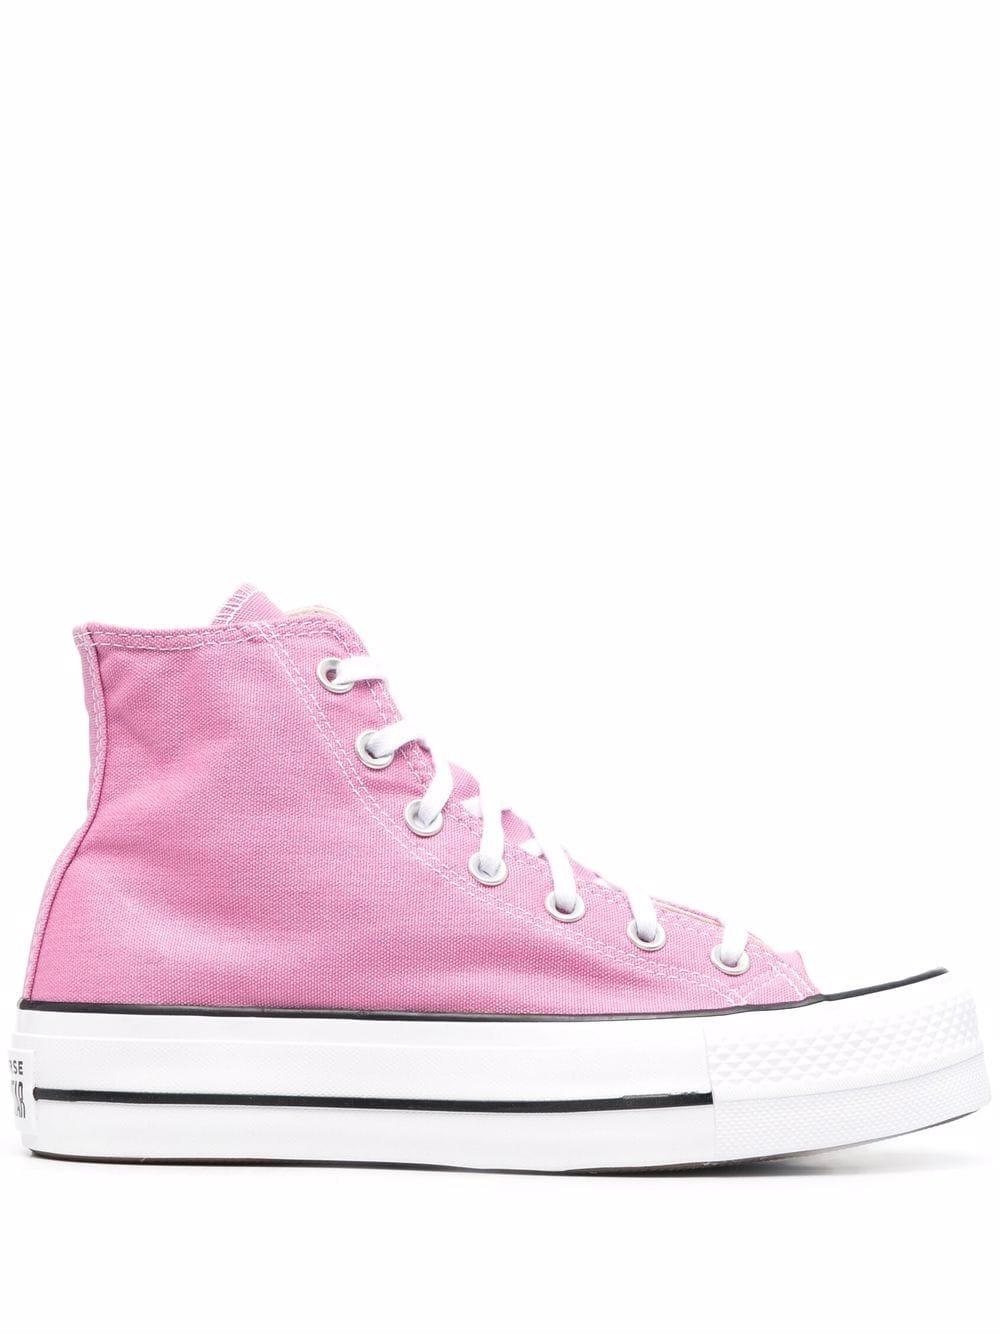 Converse Chuck Taylor Platform Sneakers in Pink | Lyst